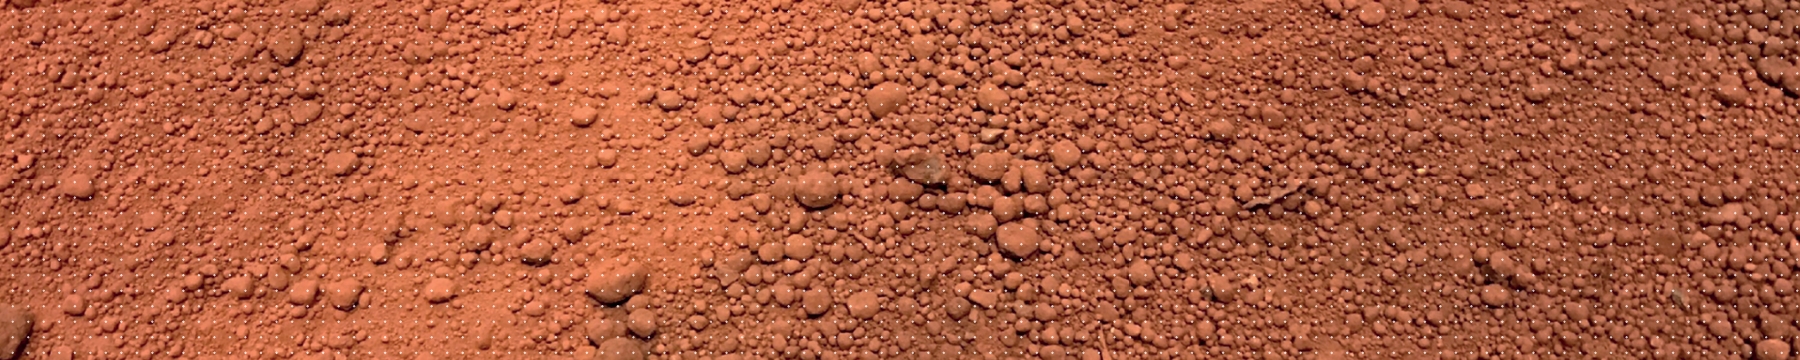 Photograph of red earth